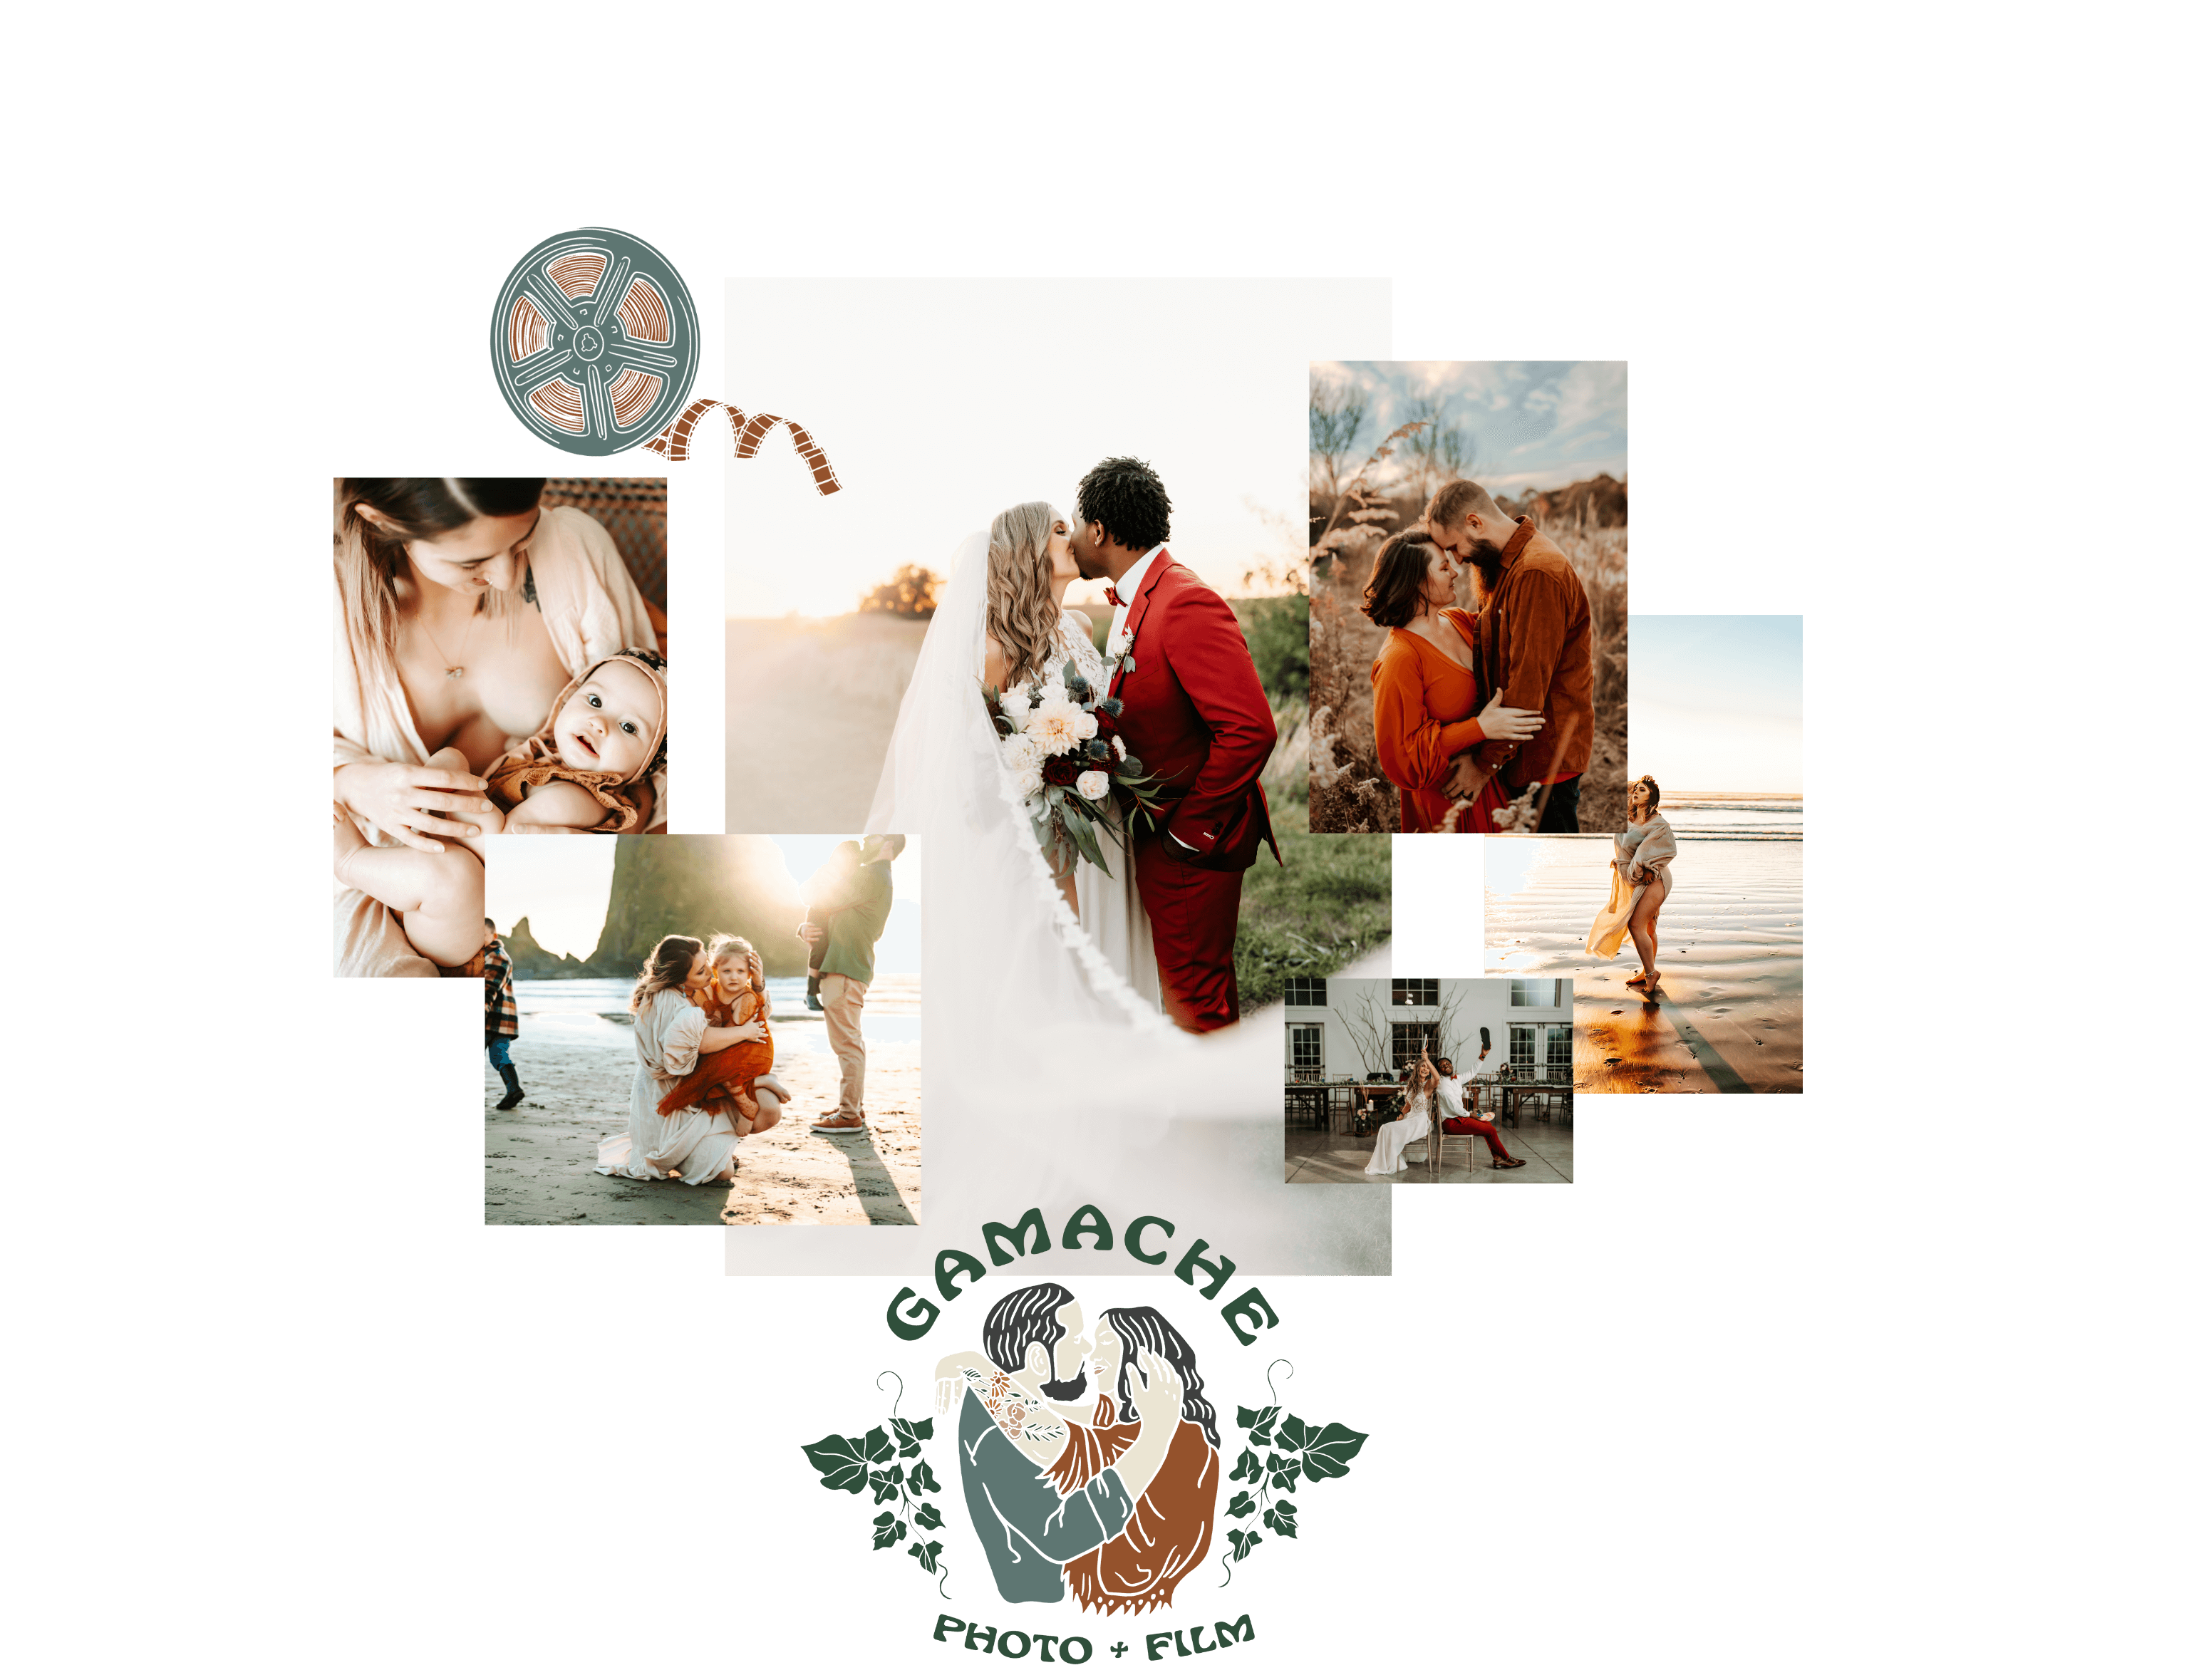 A photography web design for Gamache Photo and Film inspired by nature and whimsy. Design by House of W, a brand and web designer for photographers and creatives. 